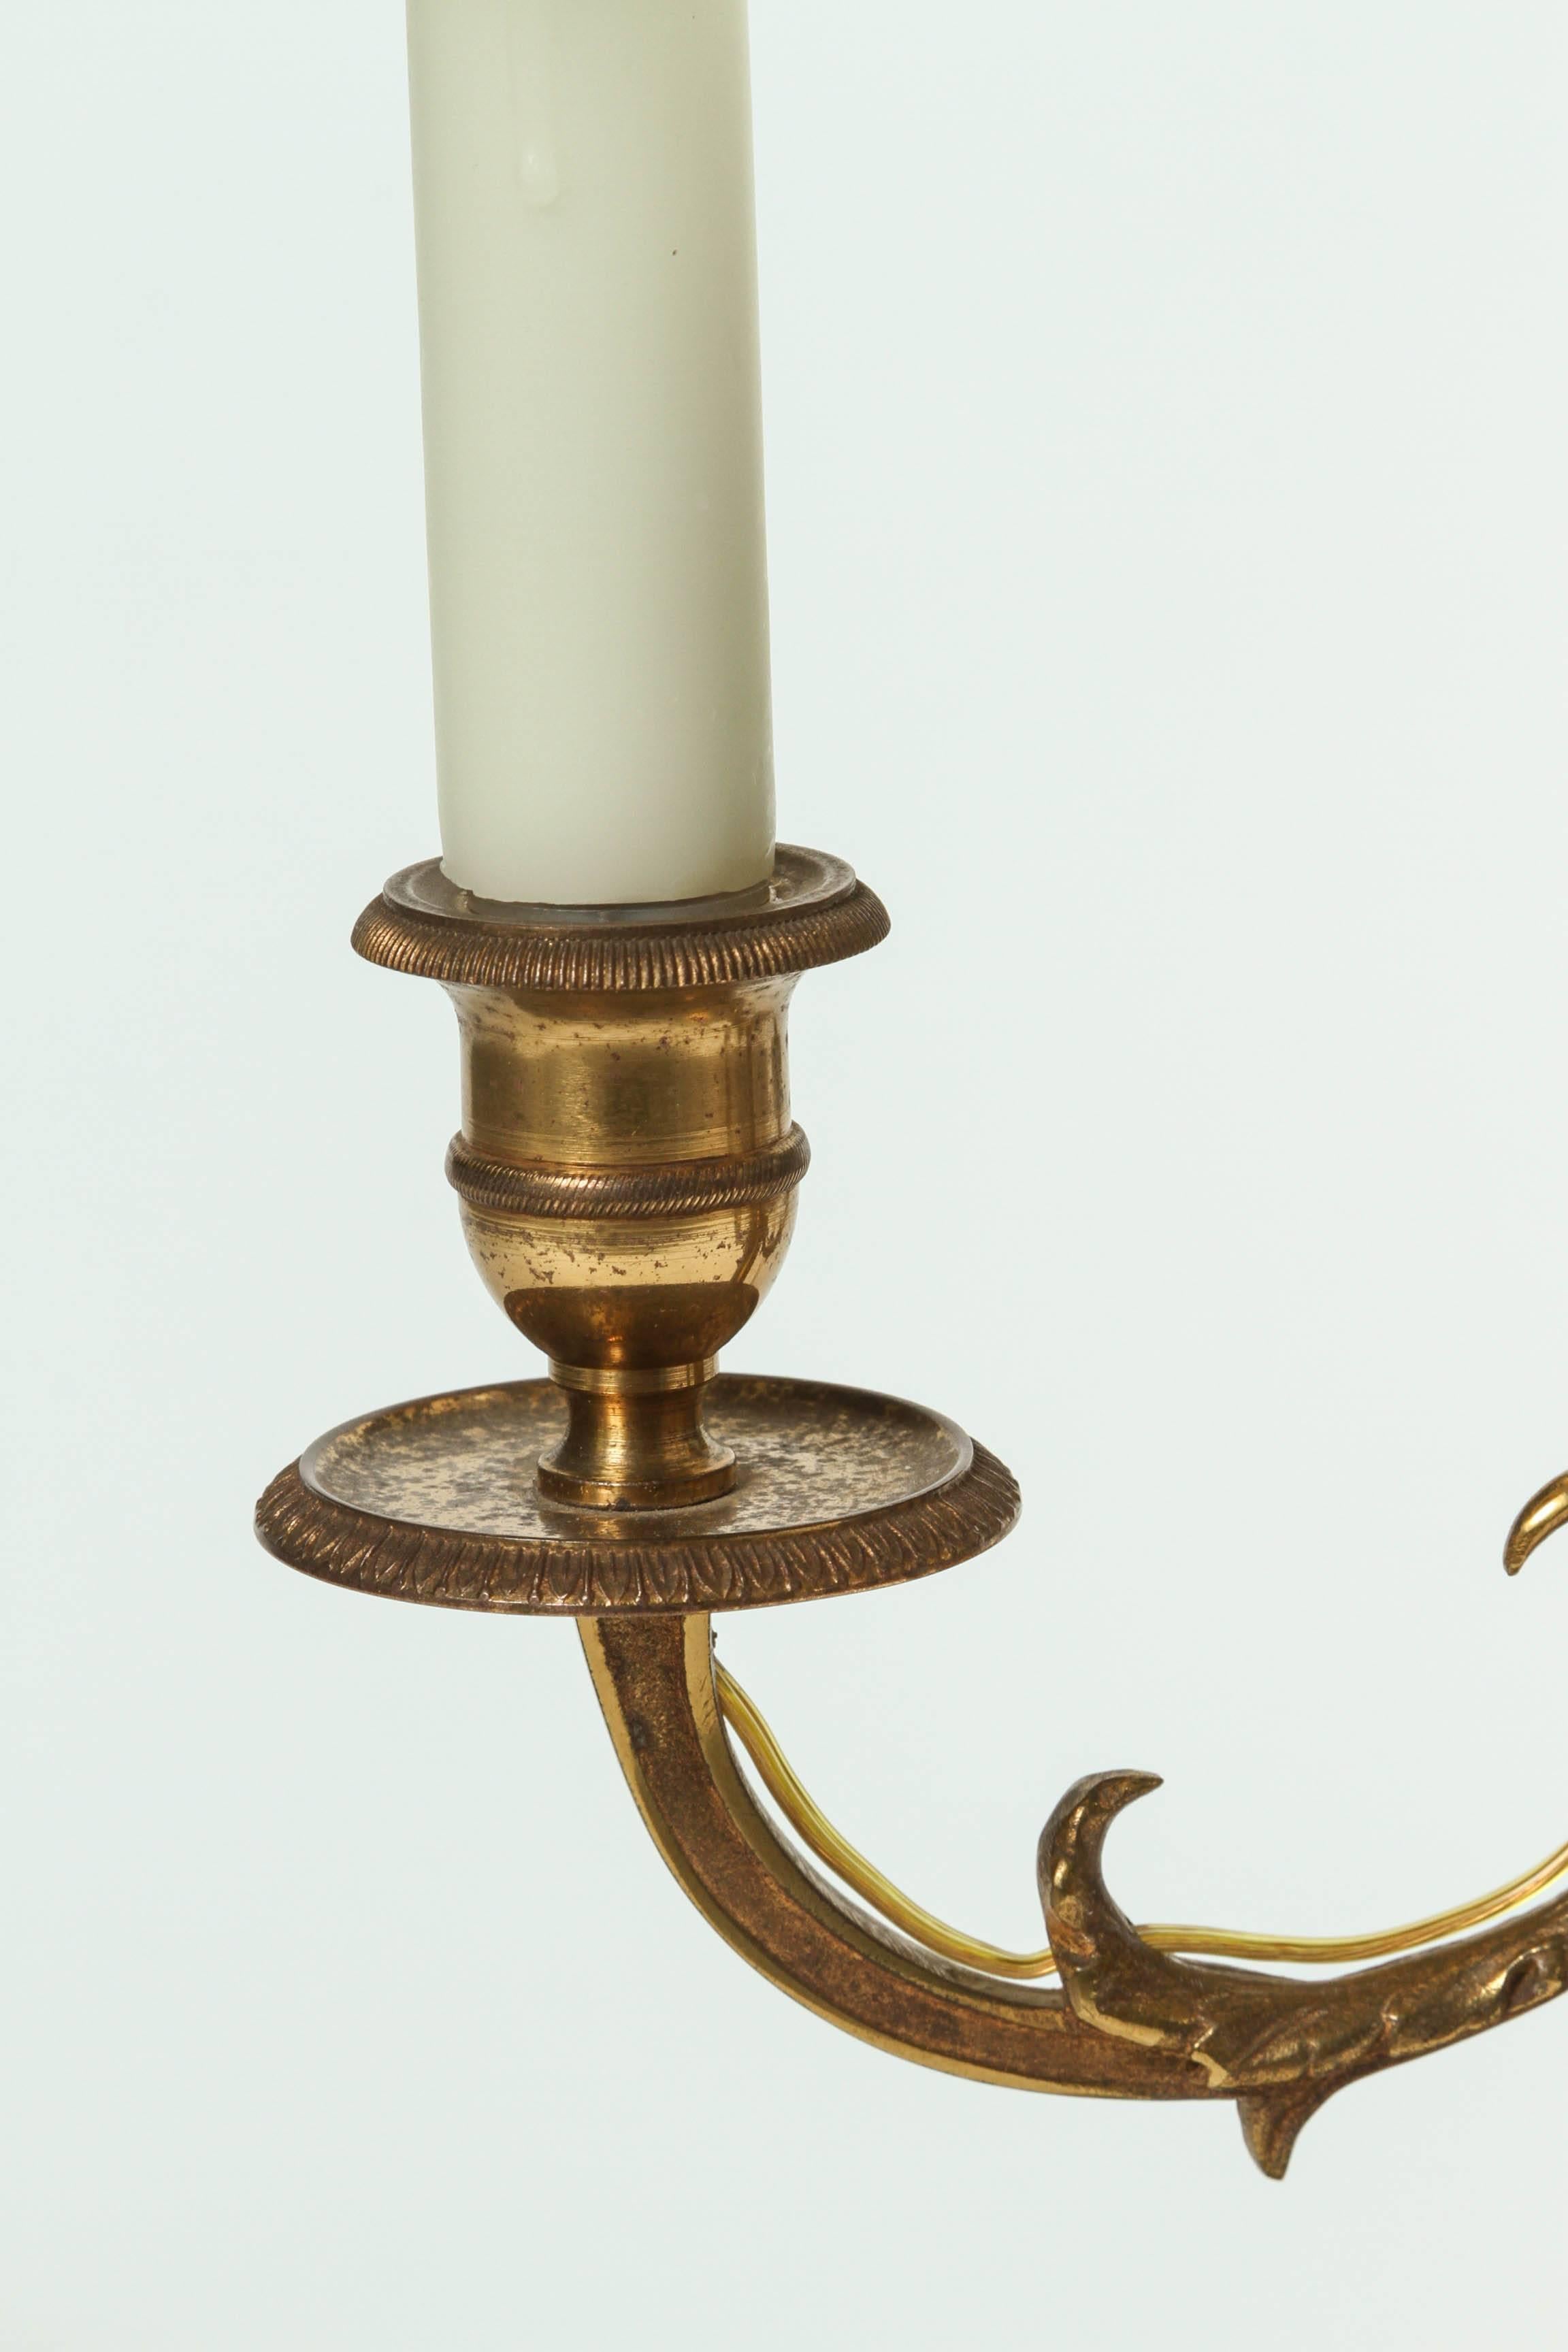 American Brass Three-Light Bouillotte Lamp with Adjustable Green Tole Shade, 20th Century